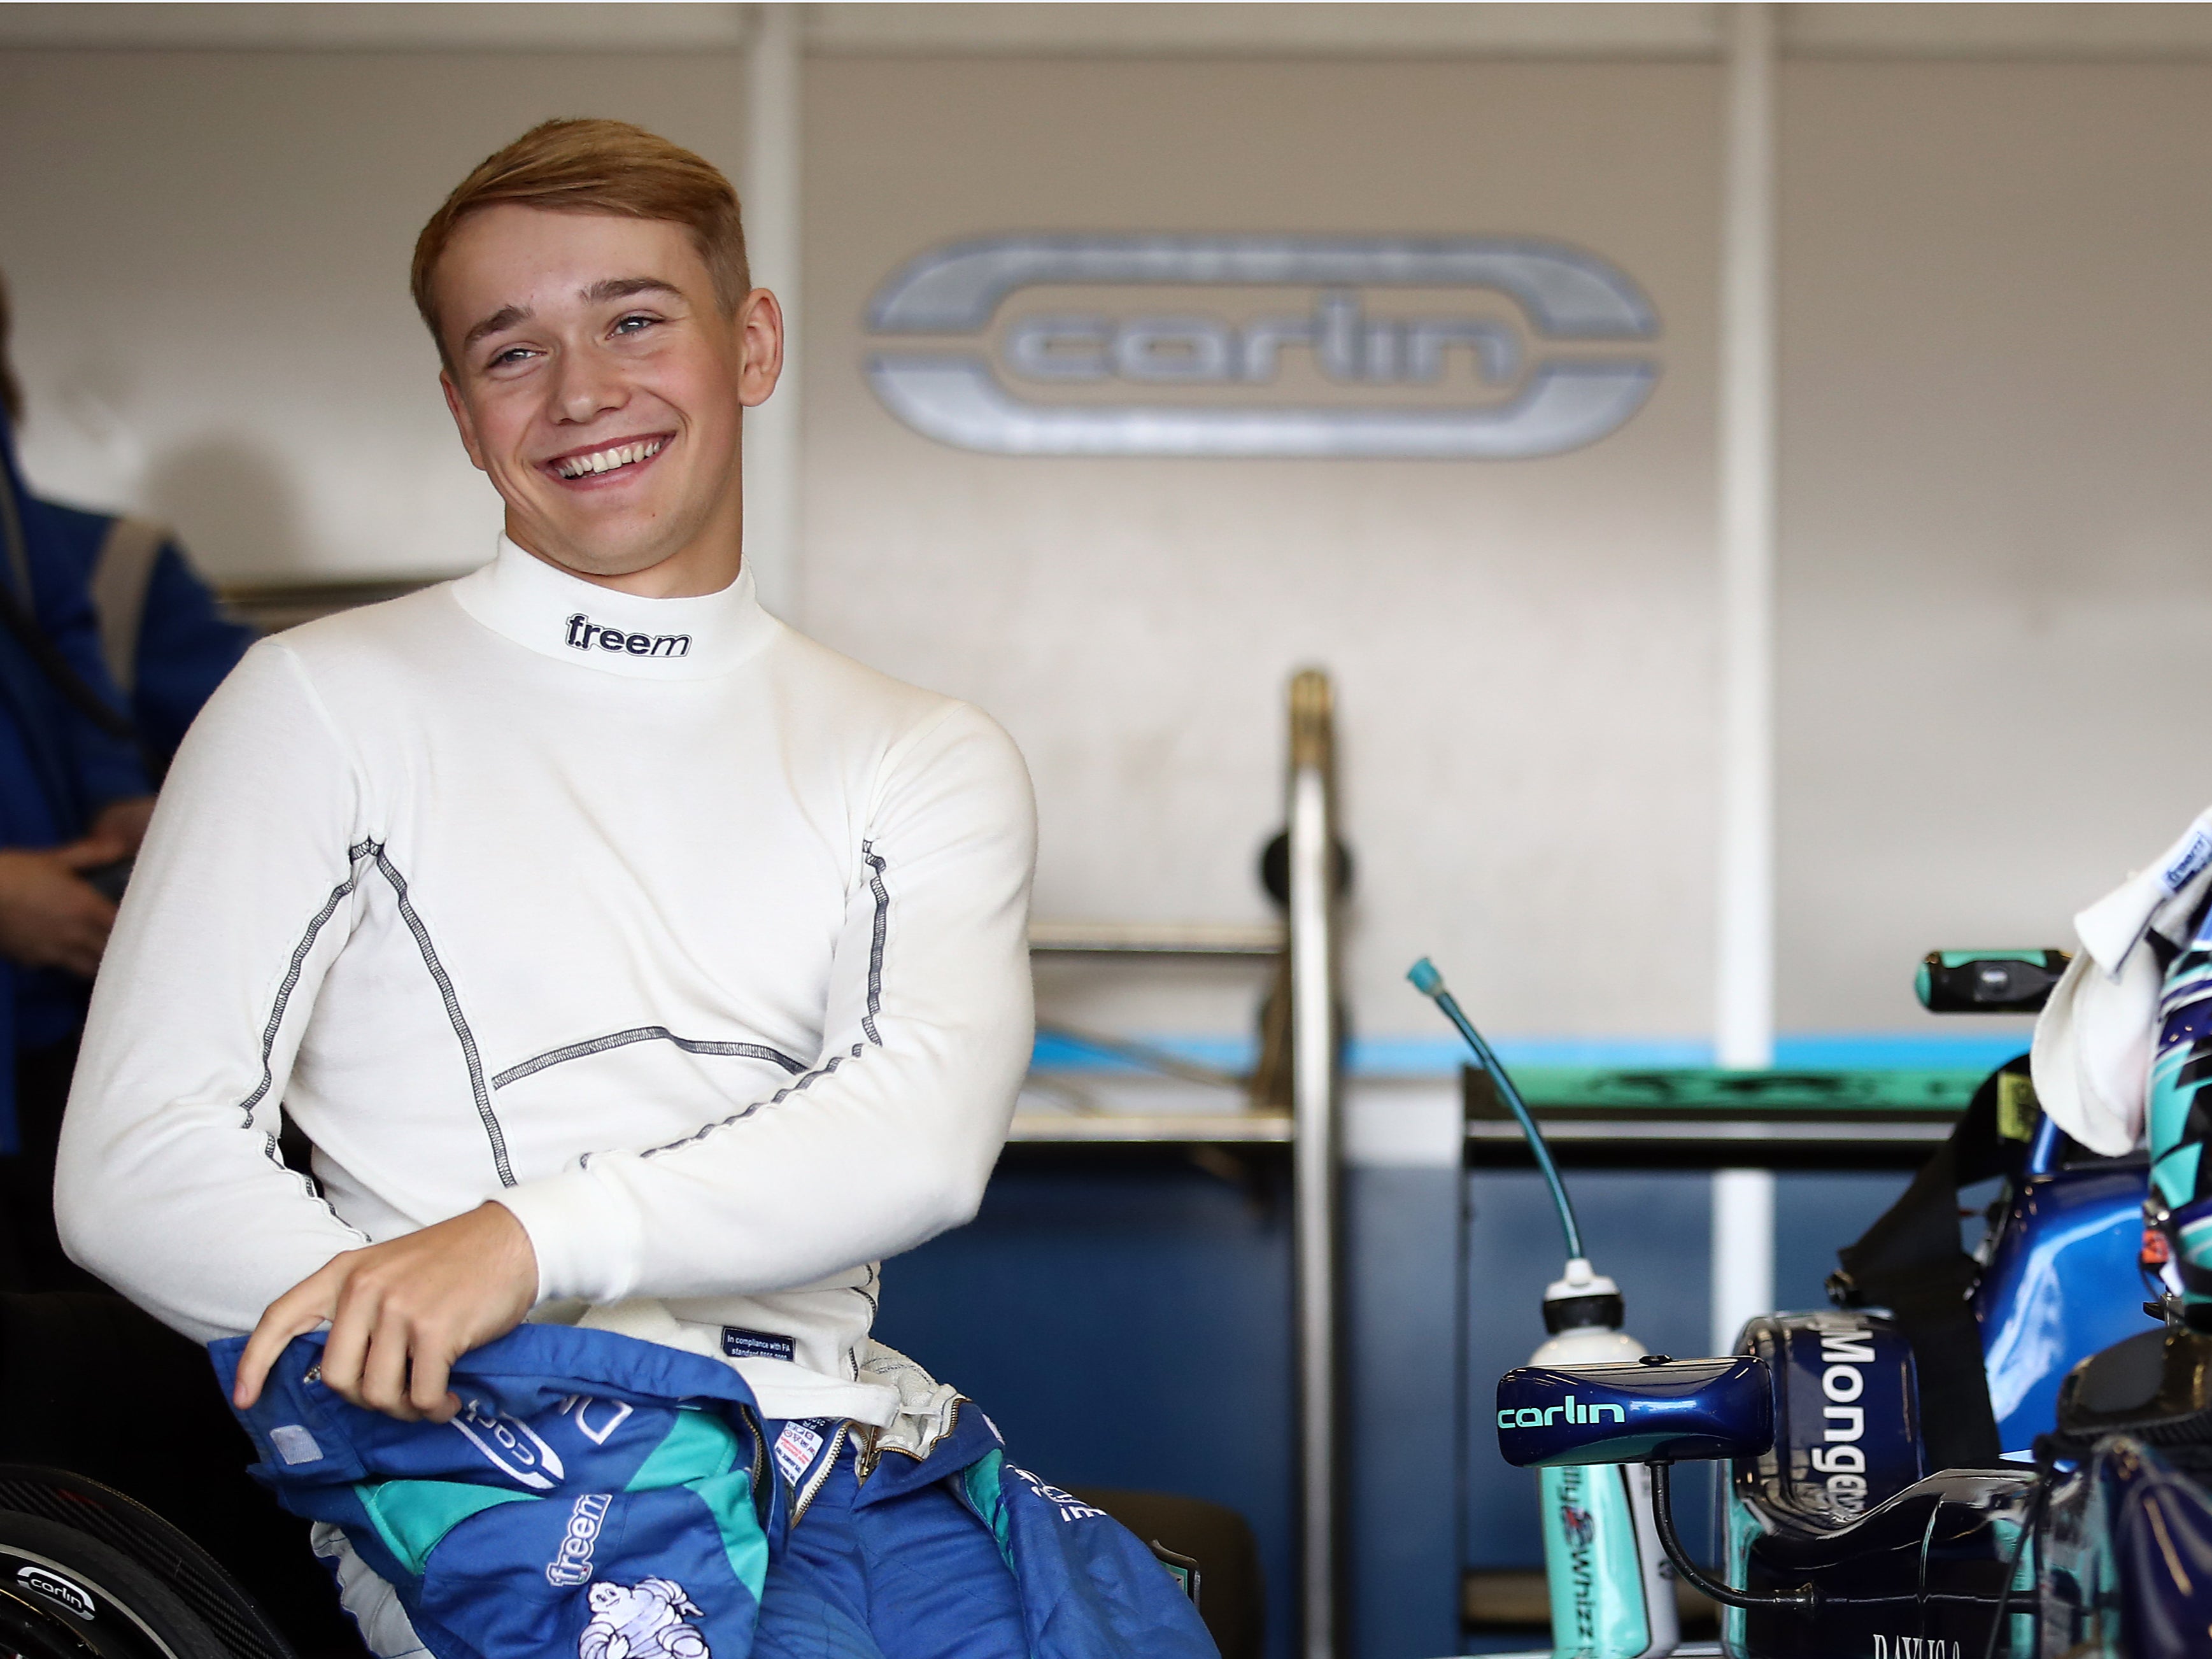 Billy Monger will be part of Channel 4’s broadcast team at the Paralympics